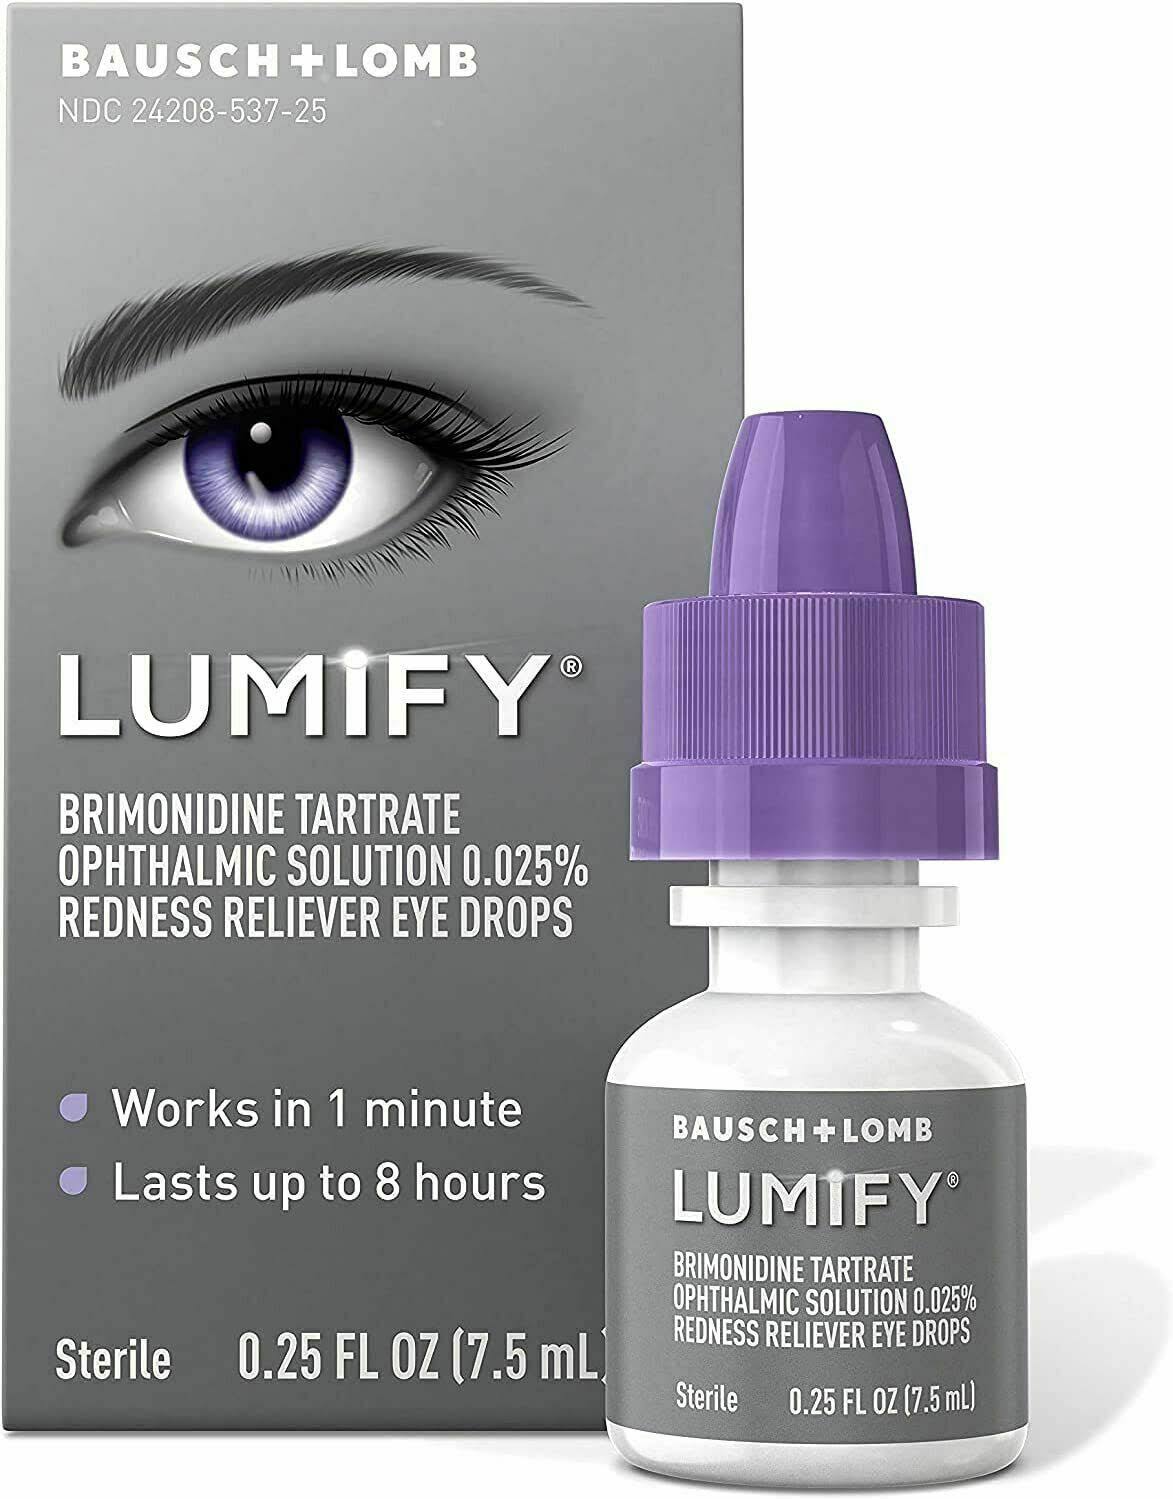 Lumify Redness Reliever Eye Drops, 0.25 Ounce (7.5mL)